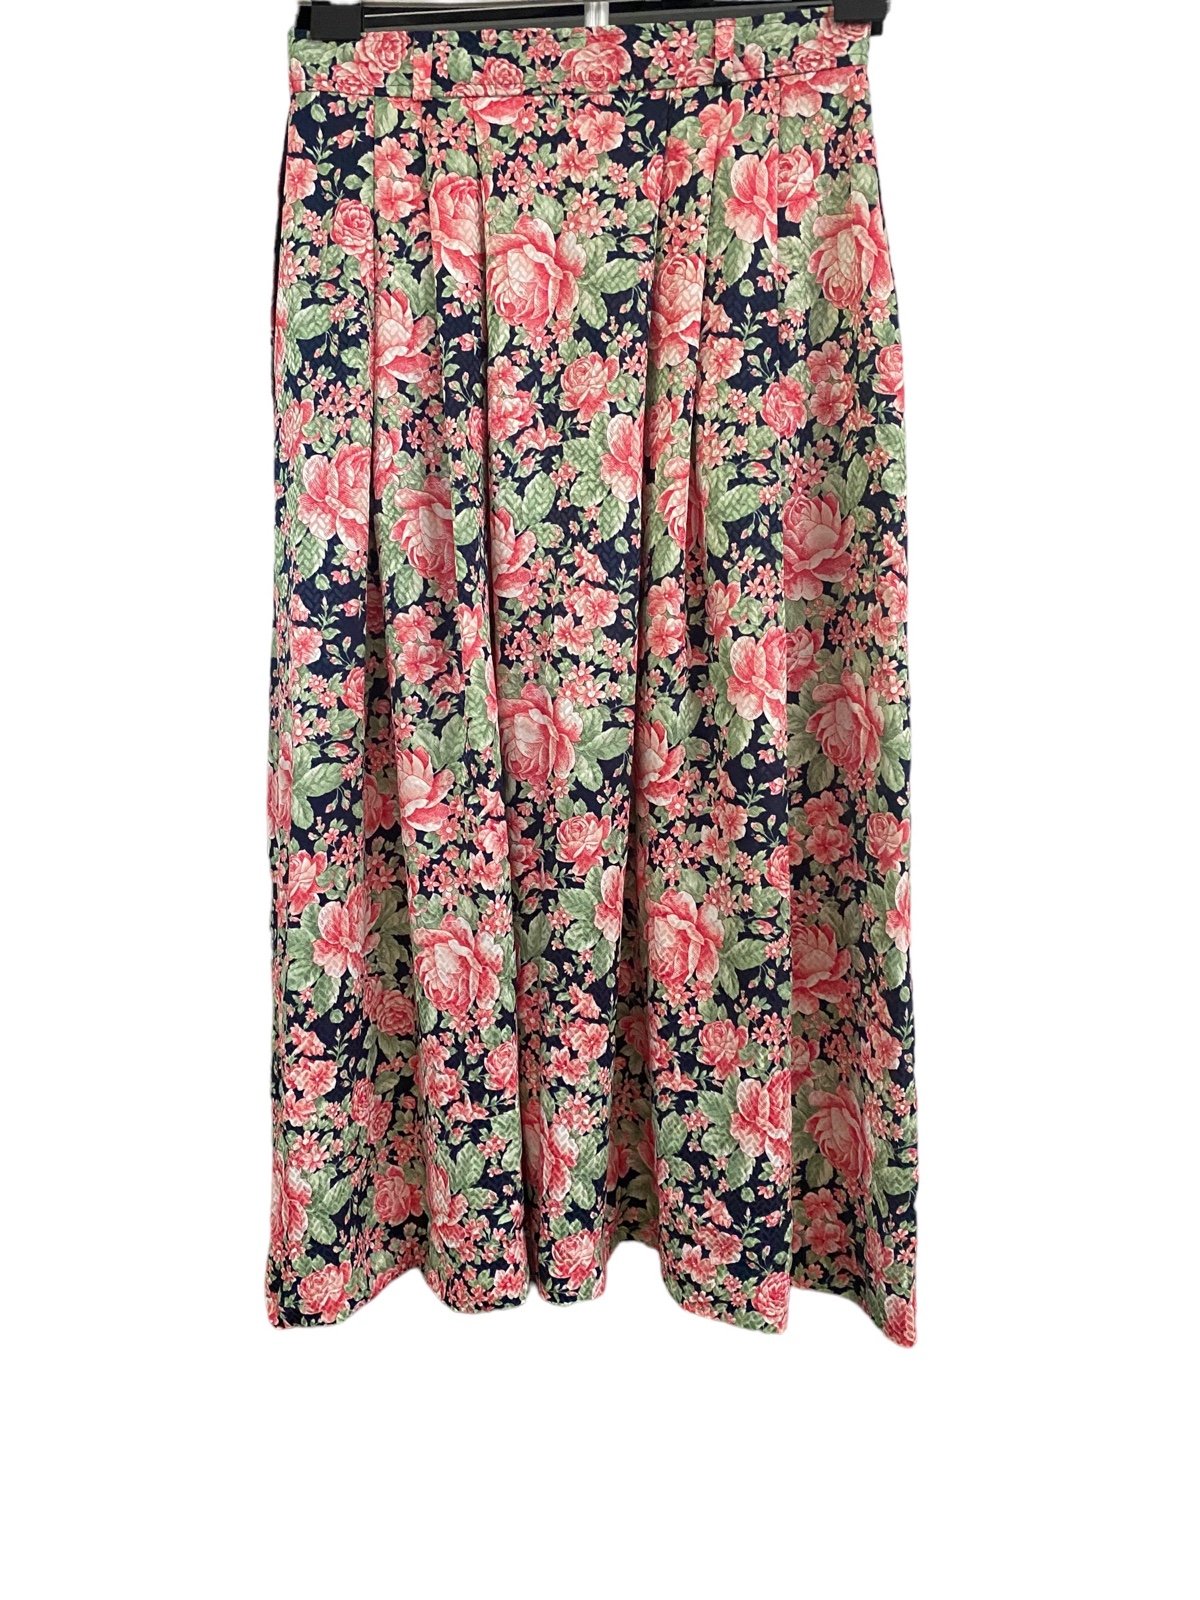 Beautiful Evan-Picone Multi Color Floral Pleated Skirt 